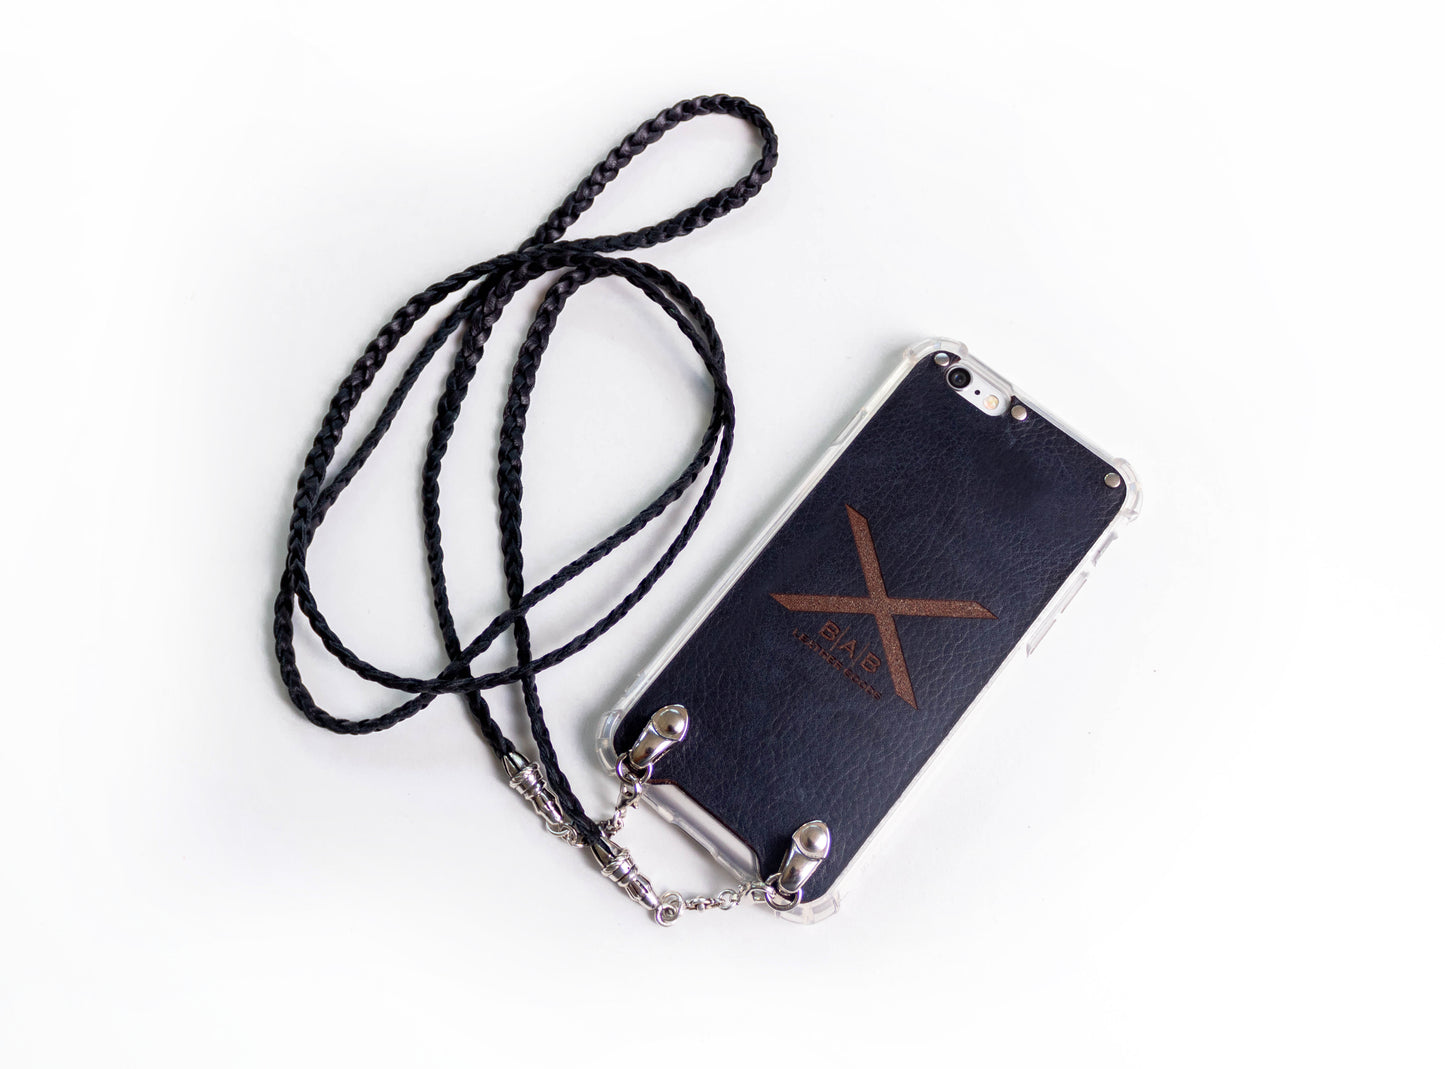 Full-Grain Genuine vegetable-tanned Leather & 925 Sterling Silver Case for iPhone. Bracelet/Crossbody/Necklace 3 double strands of Hand-braided Leather, Brown or Black.- F14​